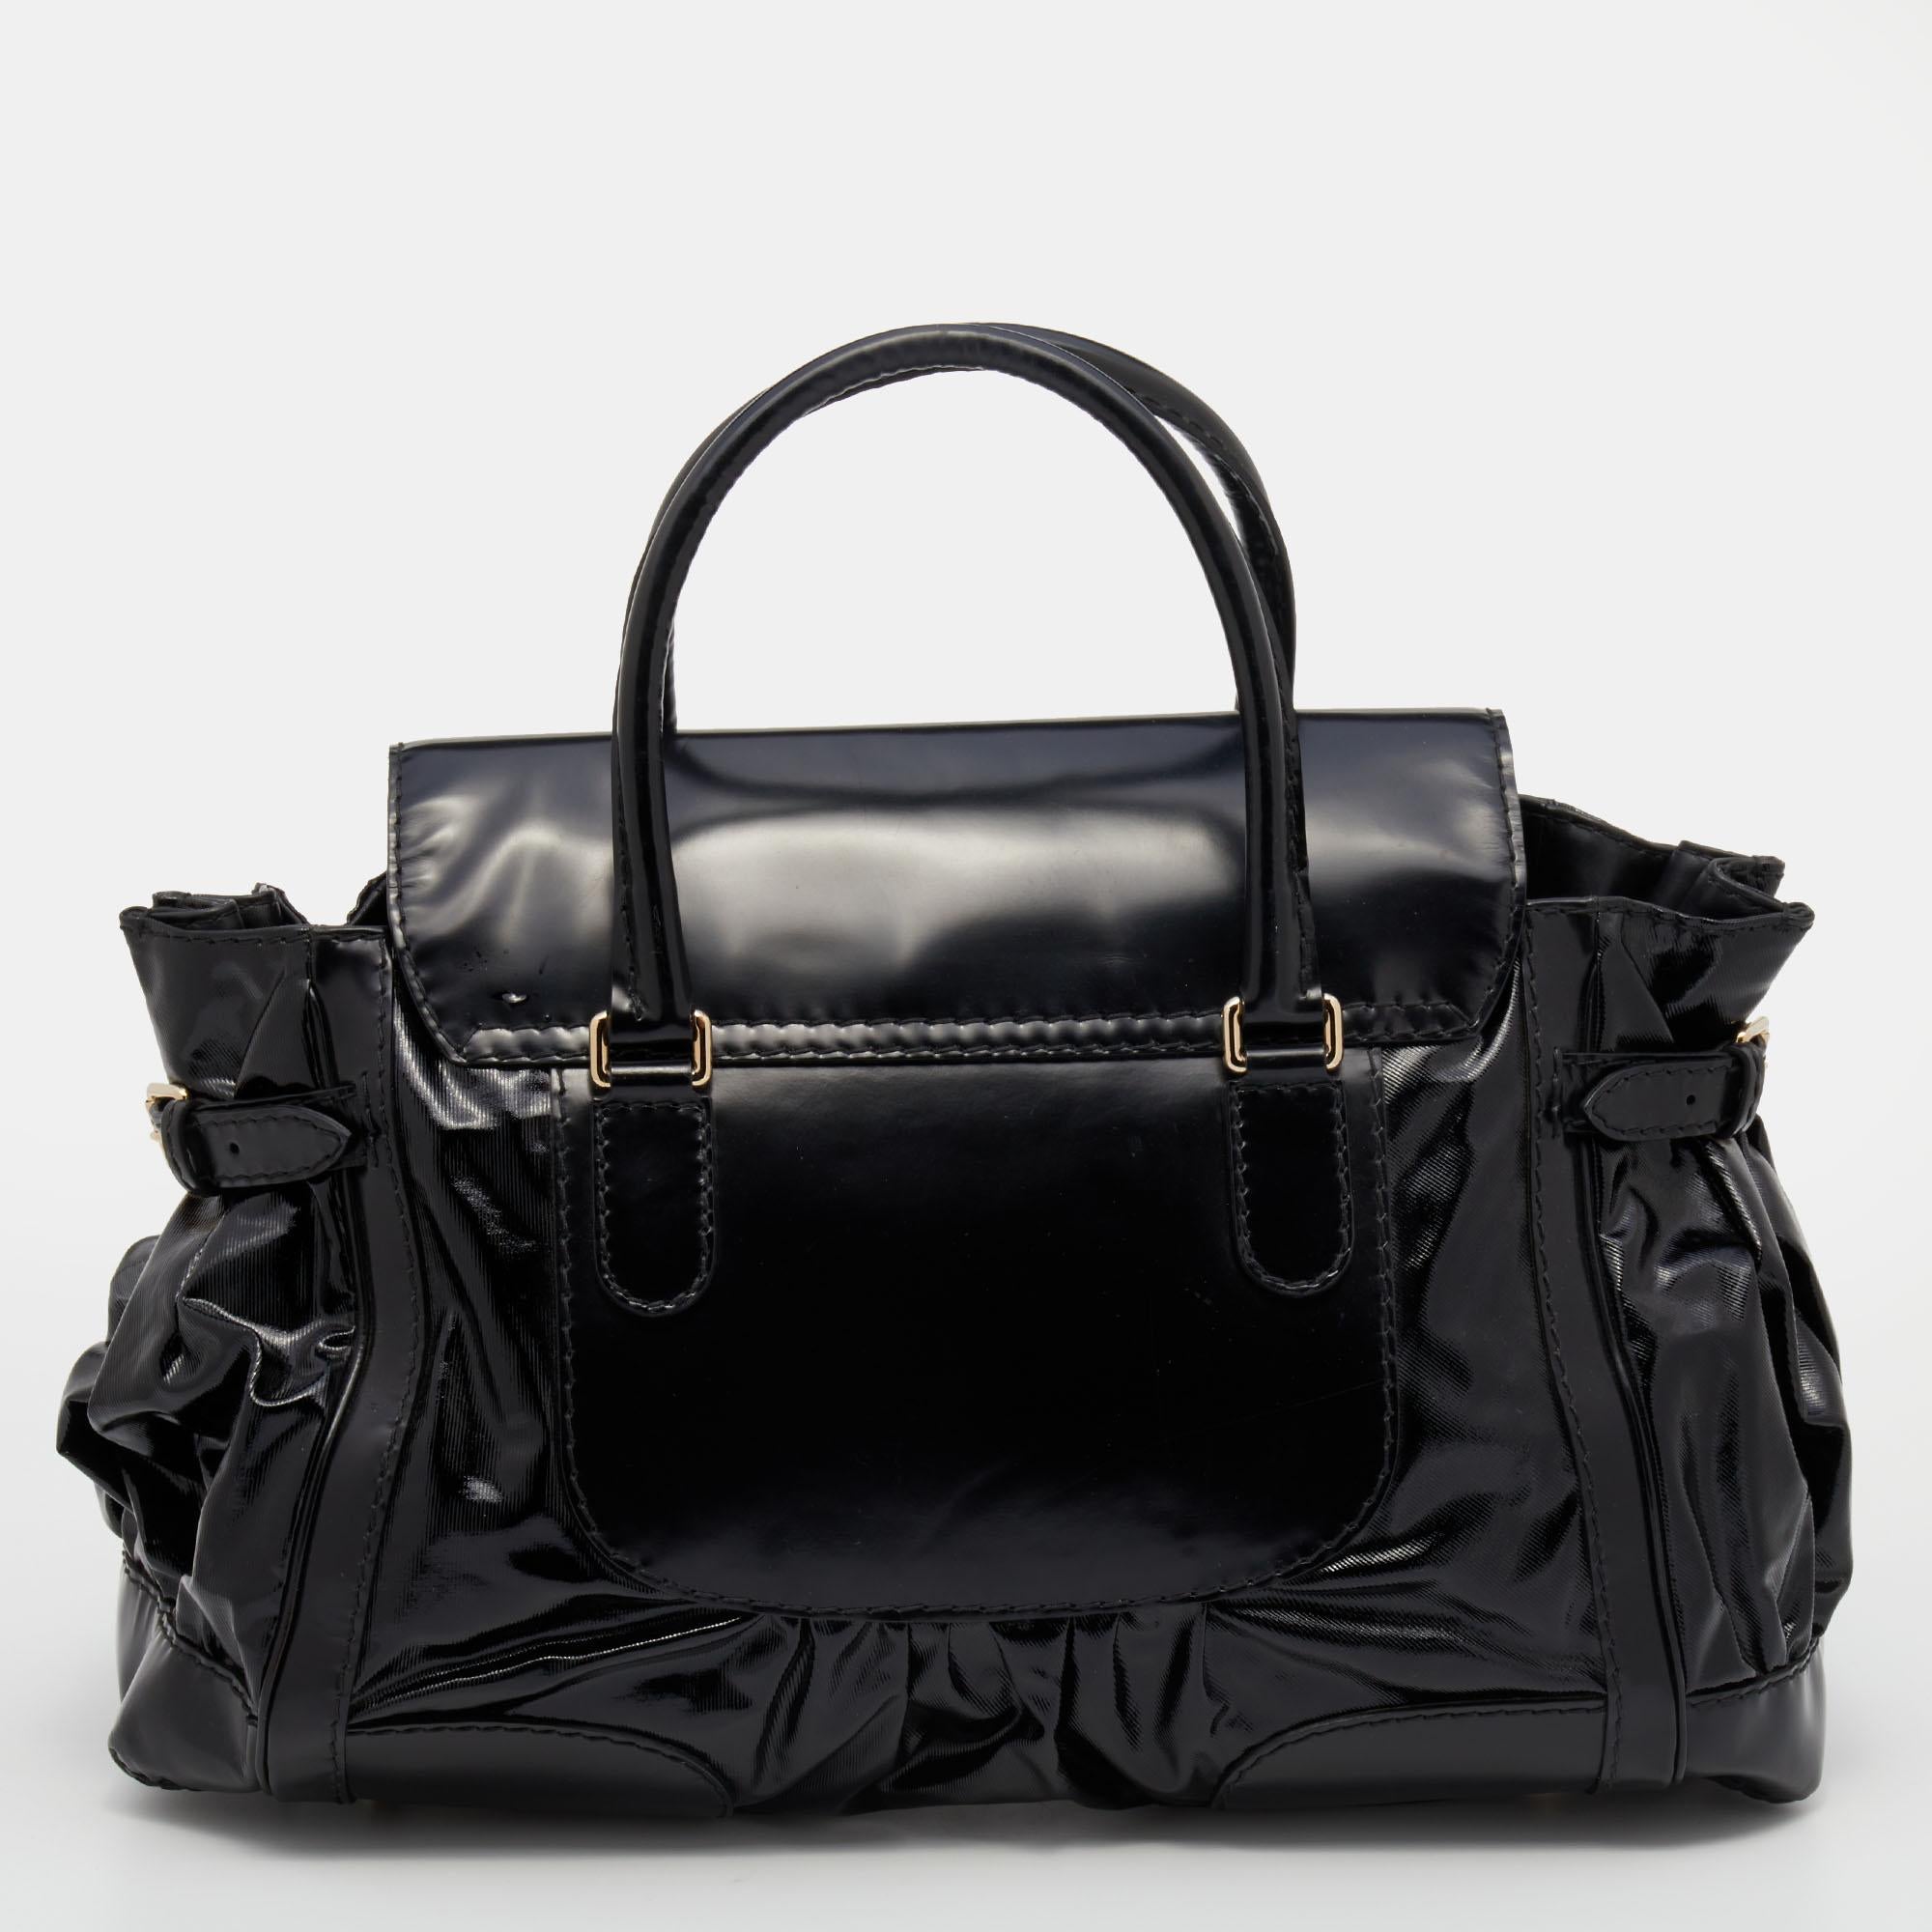 Go sophisticated with this black Dialux Queen tote by Gucci. Crafted from coated canvas and leather, it is detailed with distinctive stitching, a bow-shaped detail on the front, and dual handles. Its capacious interior comes with a zip